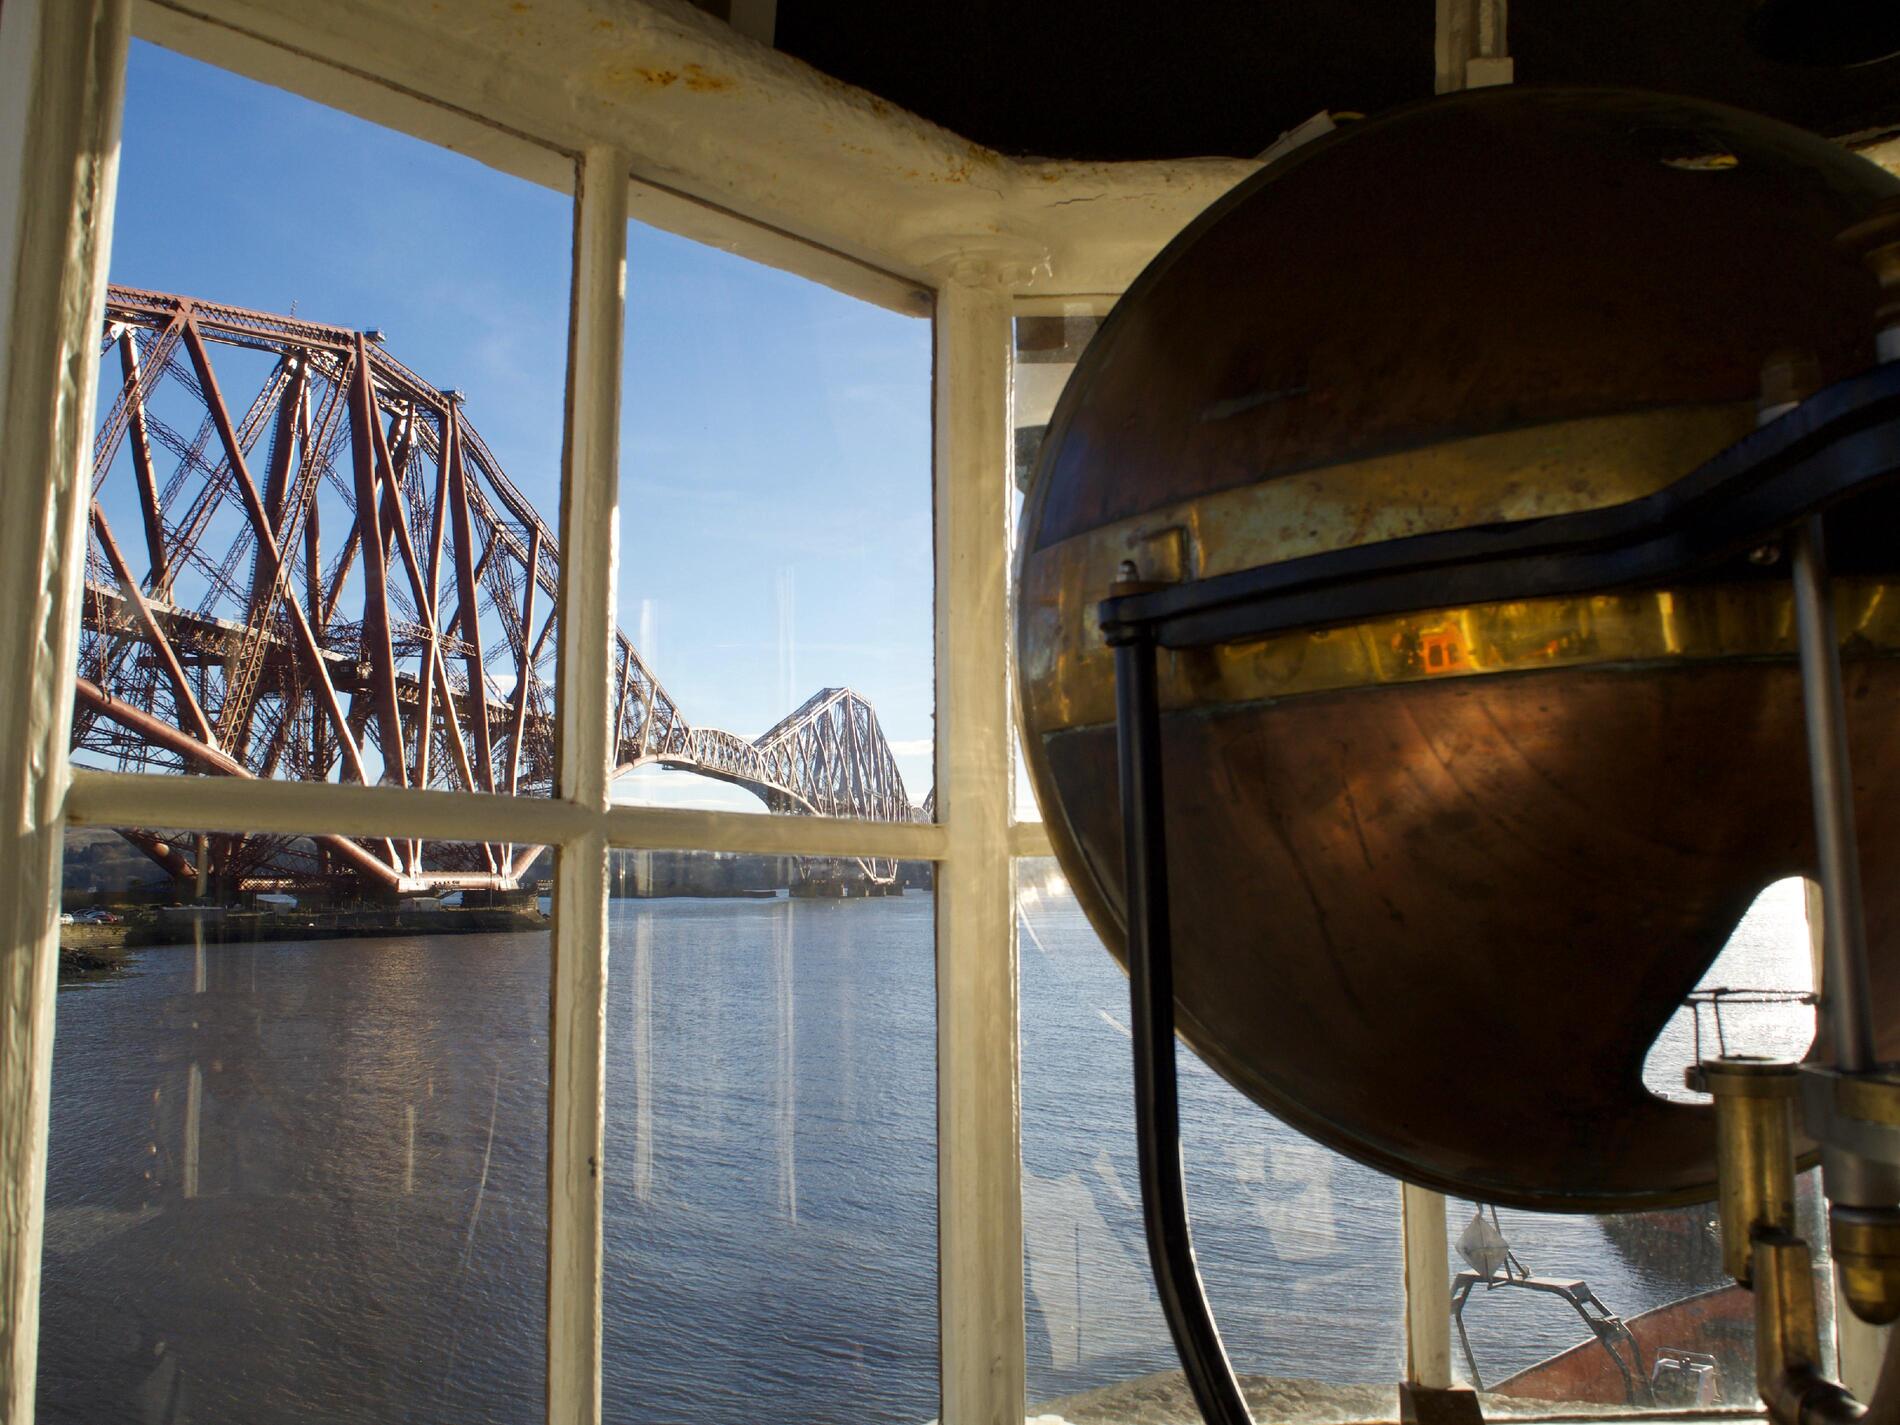 Looking from inside the lighthouse window, with a red bridge visible outside and part of a copper-coloured lamp housing inside.